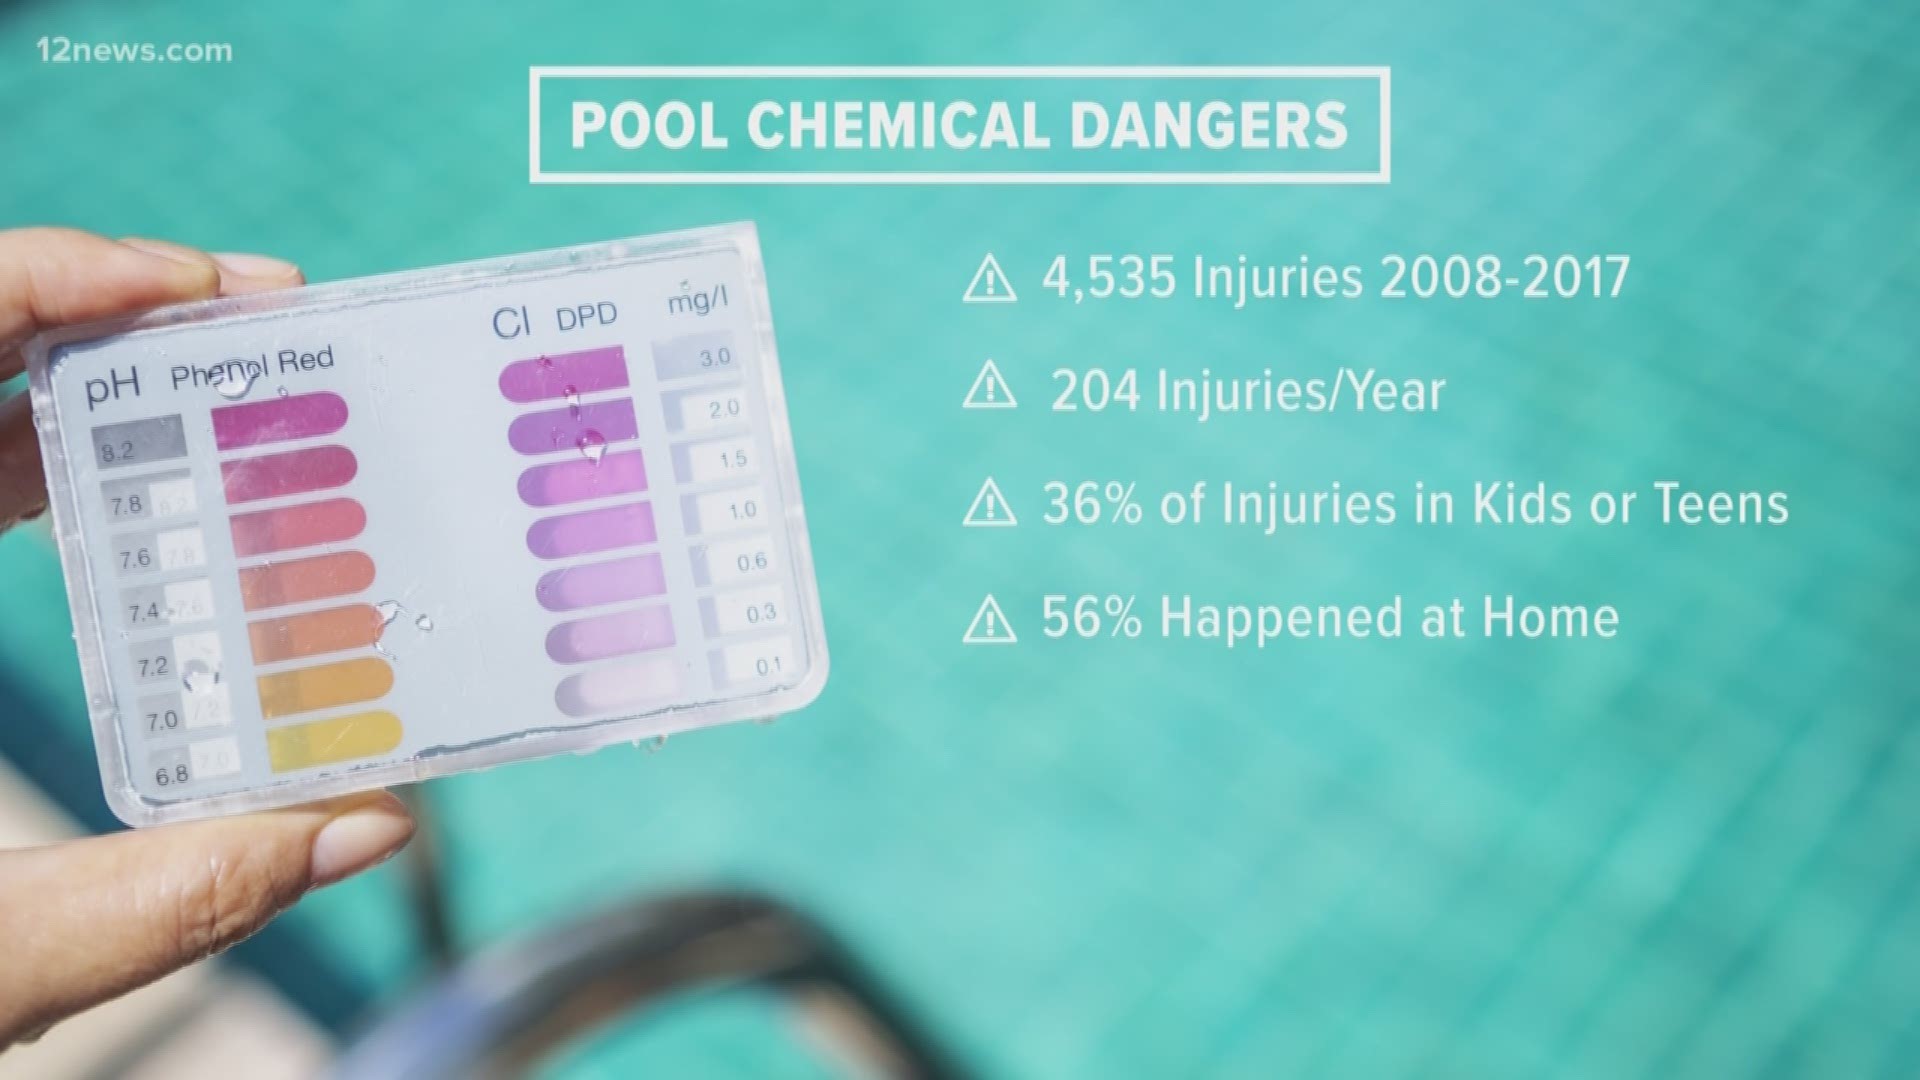 A new CDC report found pool chemicals led to more than 4,500 emergency room visits between 2008 and 2017. We give you some tips on how to stay safe around the chemicals.